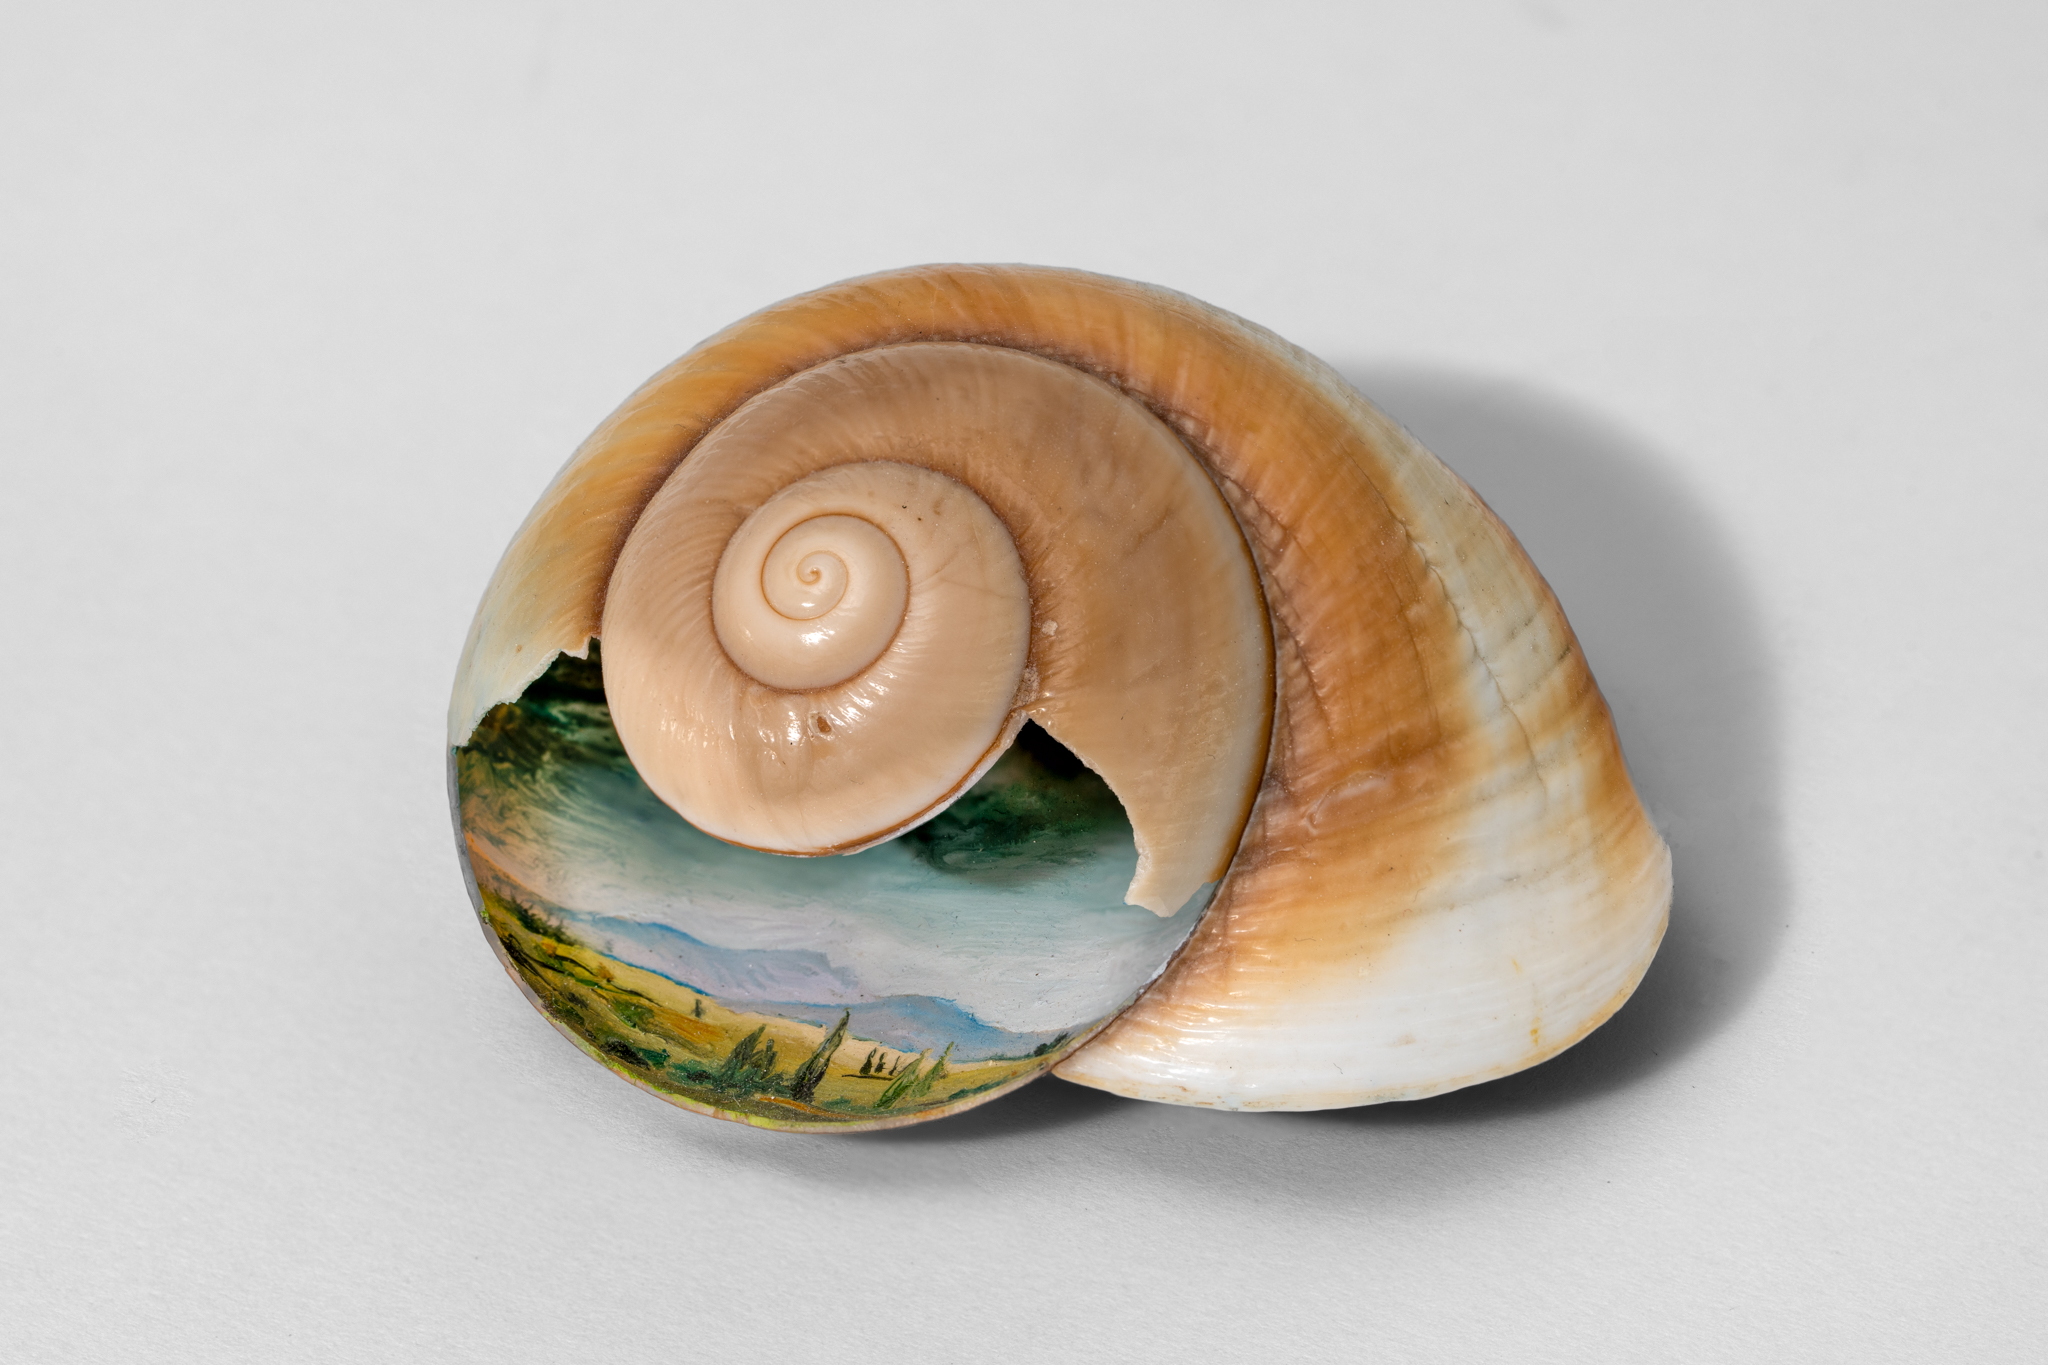 Elena Ceretti Stein, The Shell, 2022, Oil painting on shell, 9 x 7 x 4 cm. Photo by Daniel Hanoch